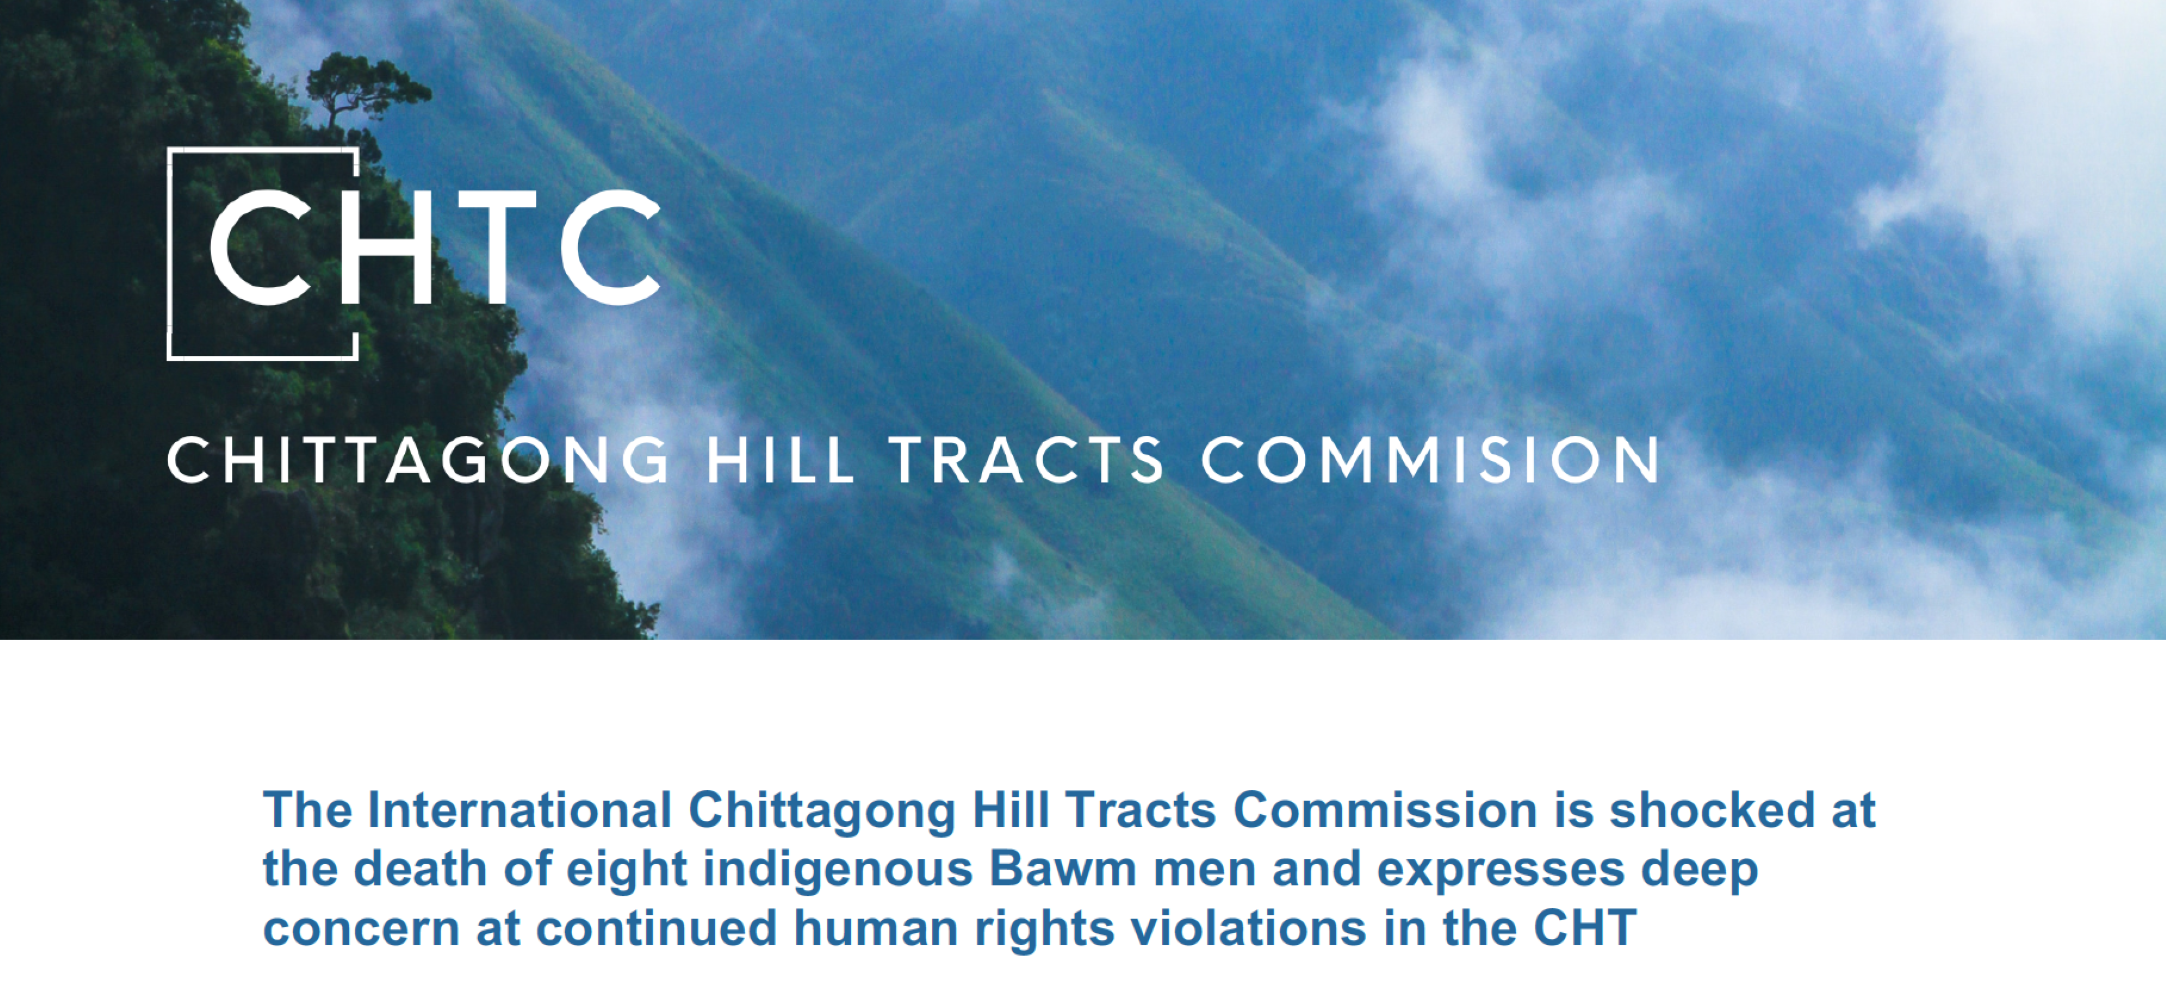 A logo for the Chittagong Hill Tracts Commission